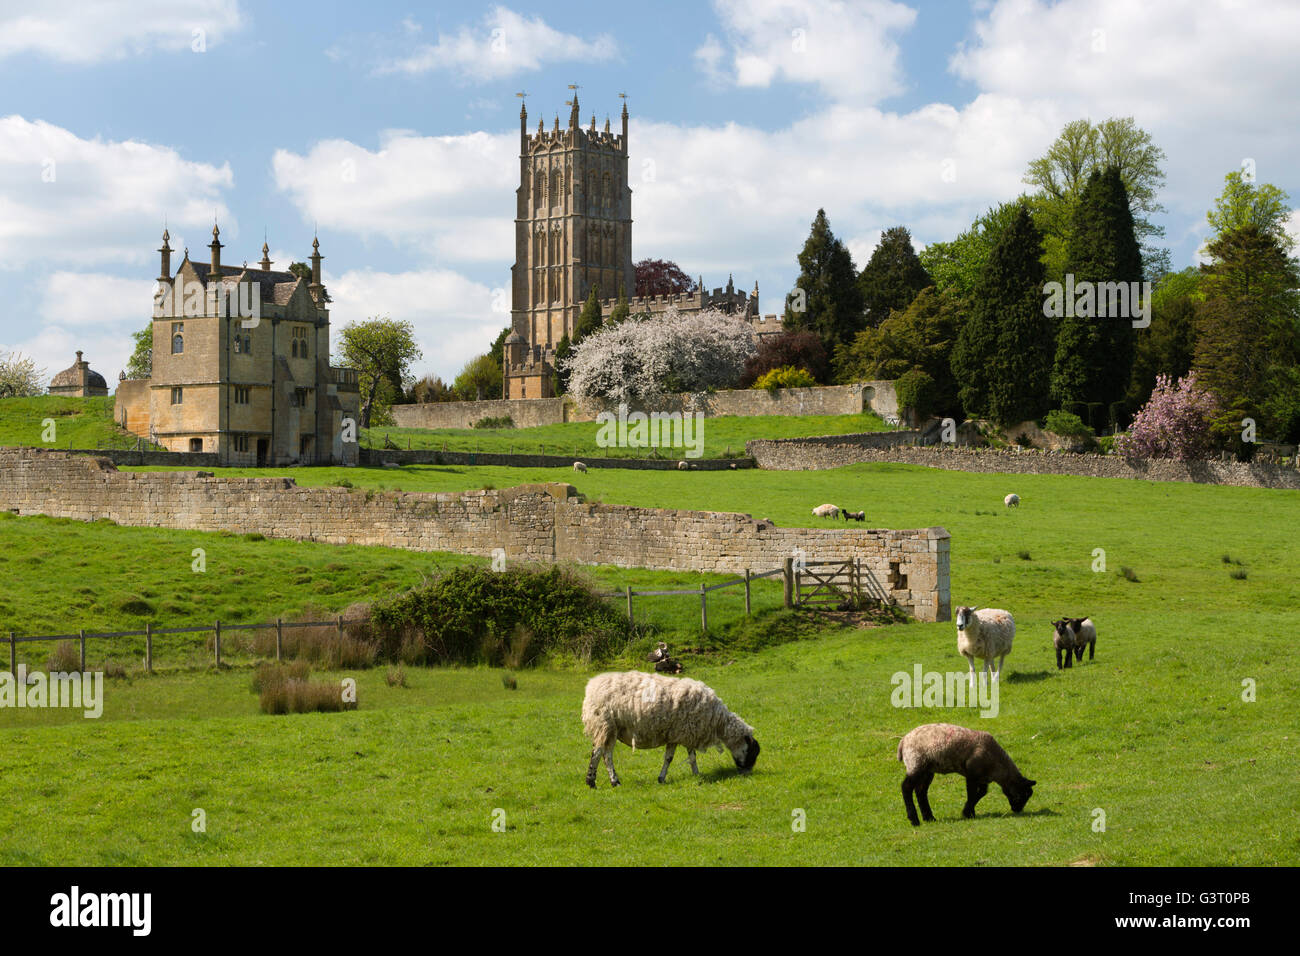 St James' Church and Old Campden House East Banqueting House with grazing sheep, Chipping Campden, Cotswolds, Gloucestershire, England, United Kingdom Stock Photo